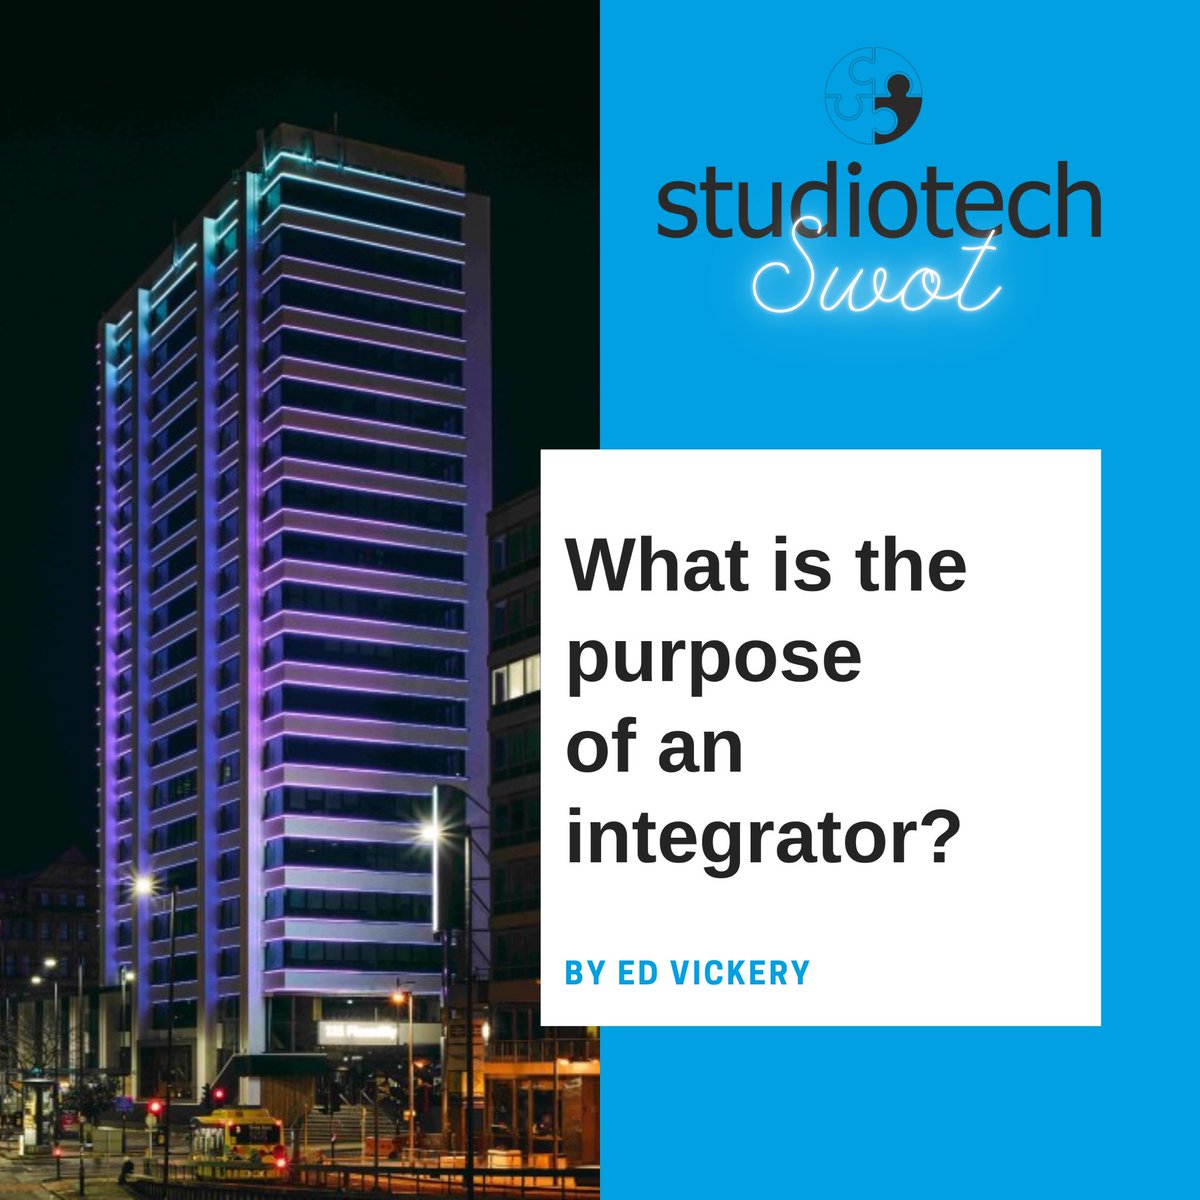 It’s here! Our first Studiotech Swot post ‘What is the purpose of an integrator?’ Part of our Studiotech Savvy blog, Swot has been launched to answer all of your questions and as a platform share our knowledge. #studiotechsavvy #studiotechswot #teamstudiotech #blogpost